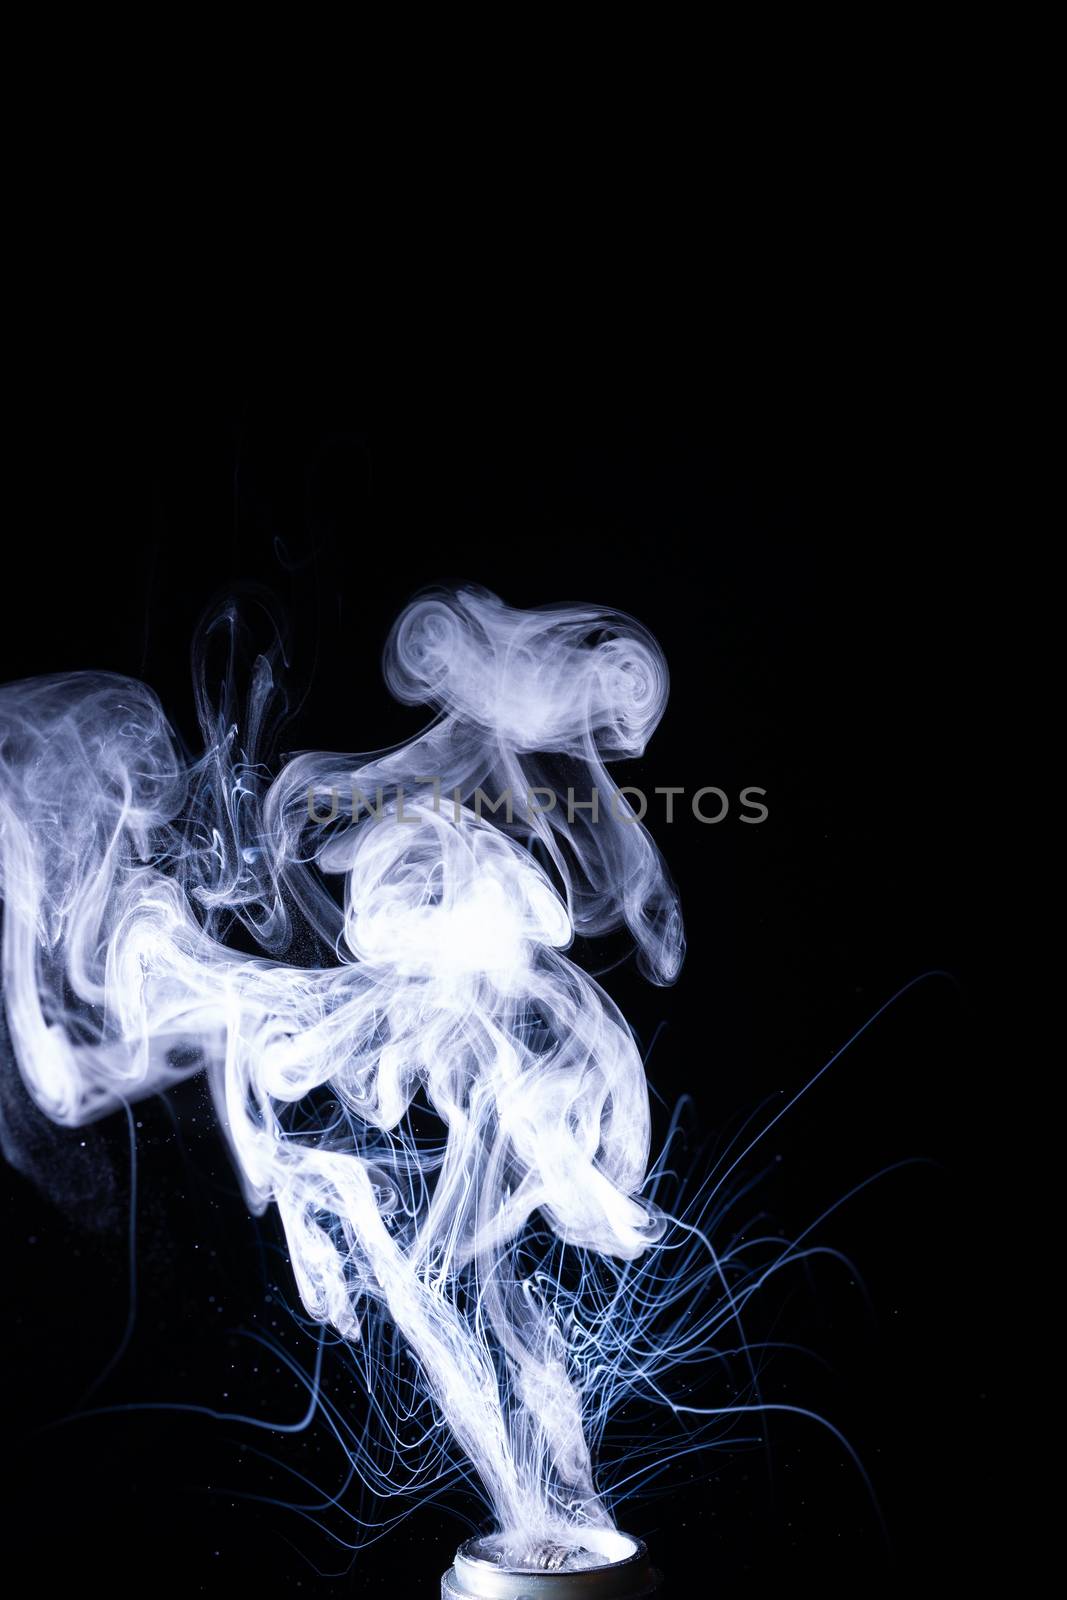 Vape smoke clouds isolated on black background. Hot vape liquid splash in vape coil. Nice aromatic cloud. Low light photo. Underexposed photo in a low key style.